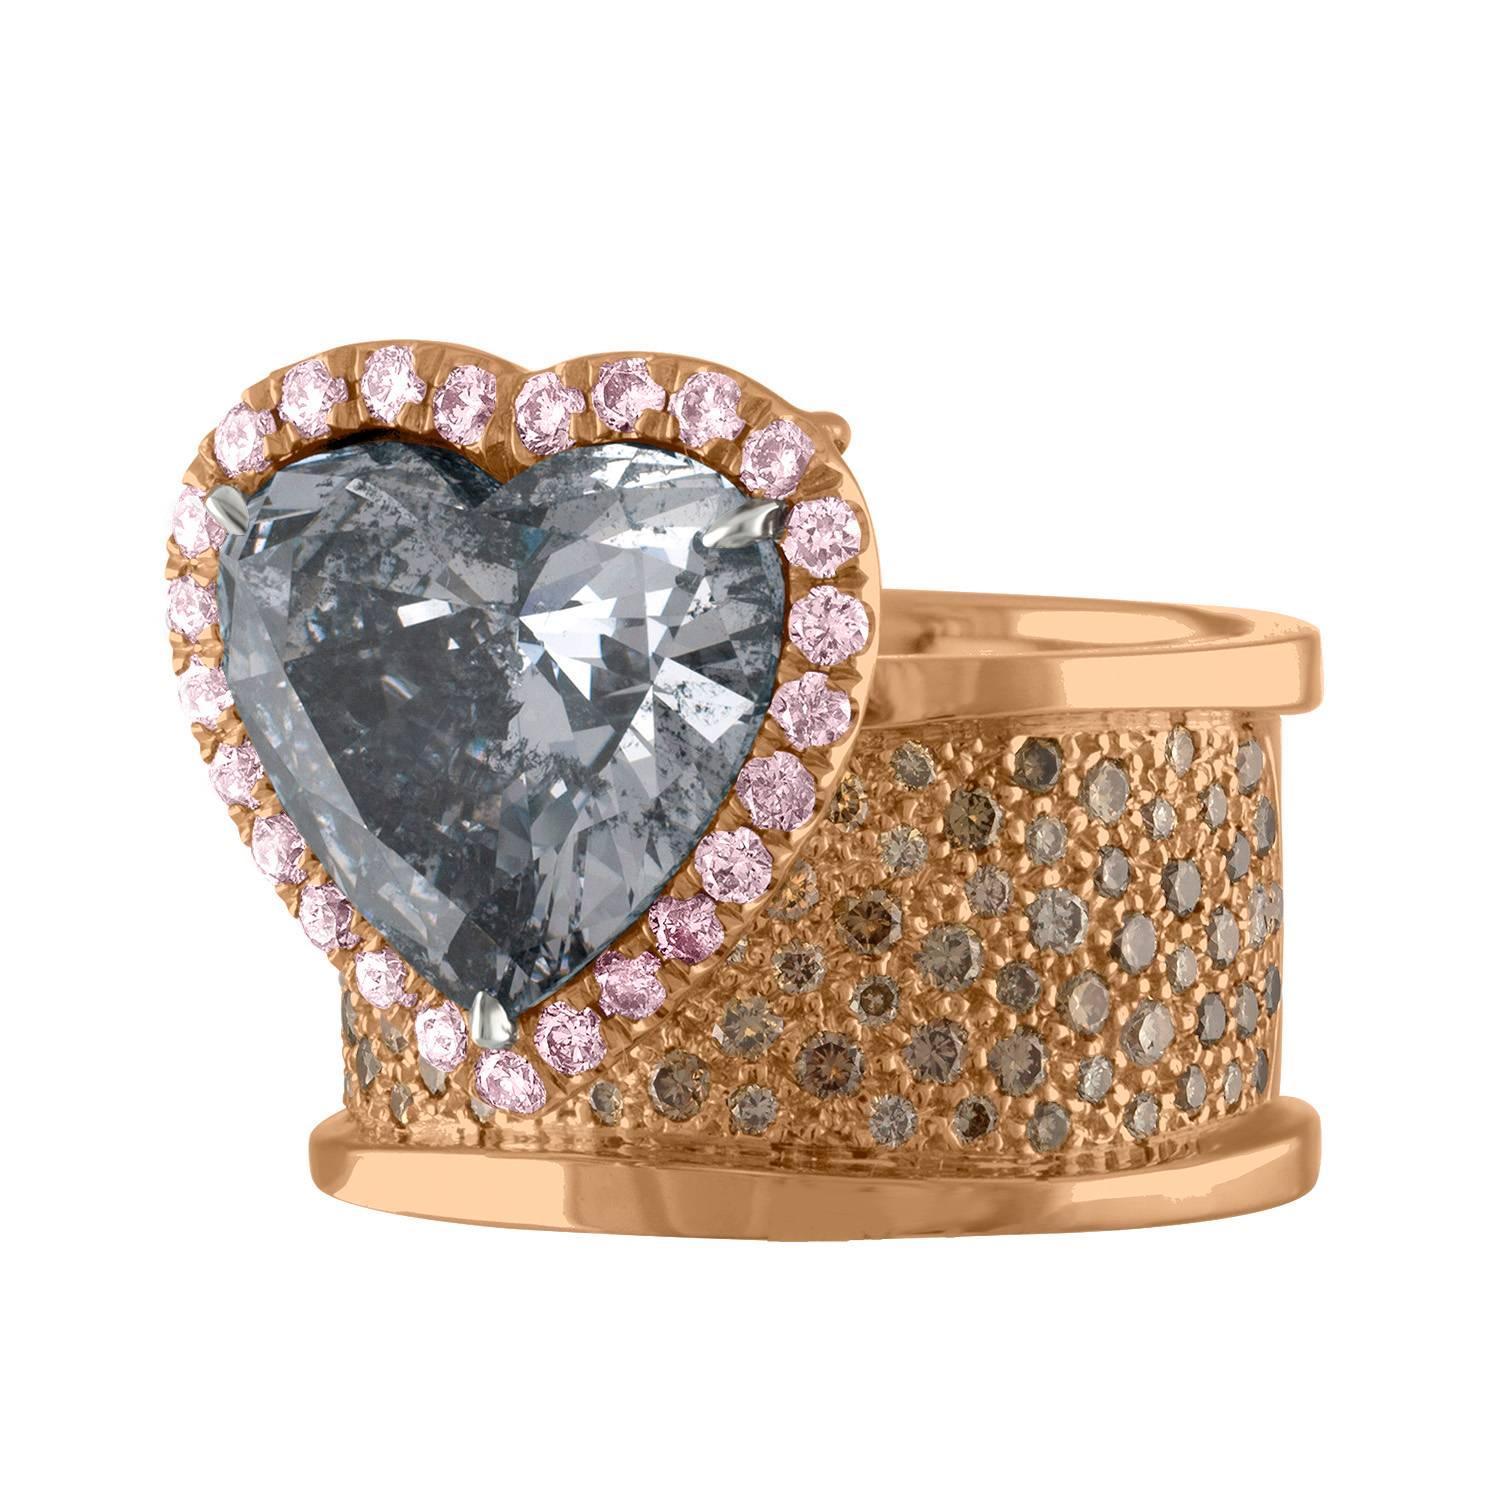 An Amazing looking Ring. 
The Center of this Breath Taking Rose Gold Ring is a Beautiful Heart Shape Diamond that has a very Unique Color to it - it is Certified as Fancy Gray by The GIA laboratory.
The Band is a Wide Band that is made out of 18K